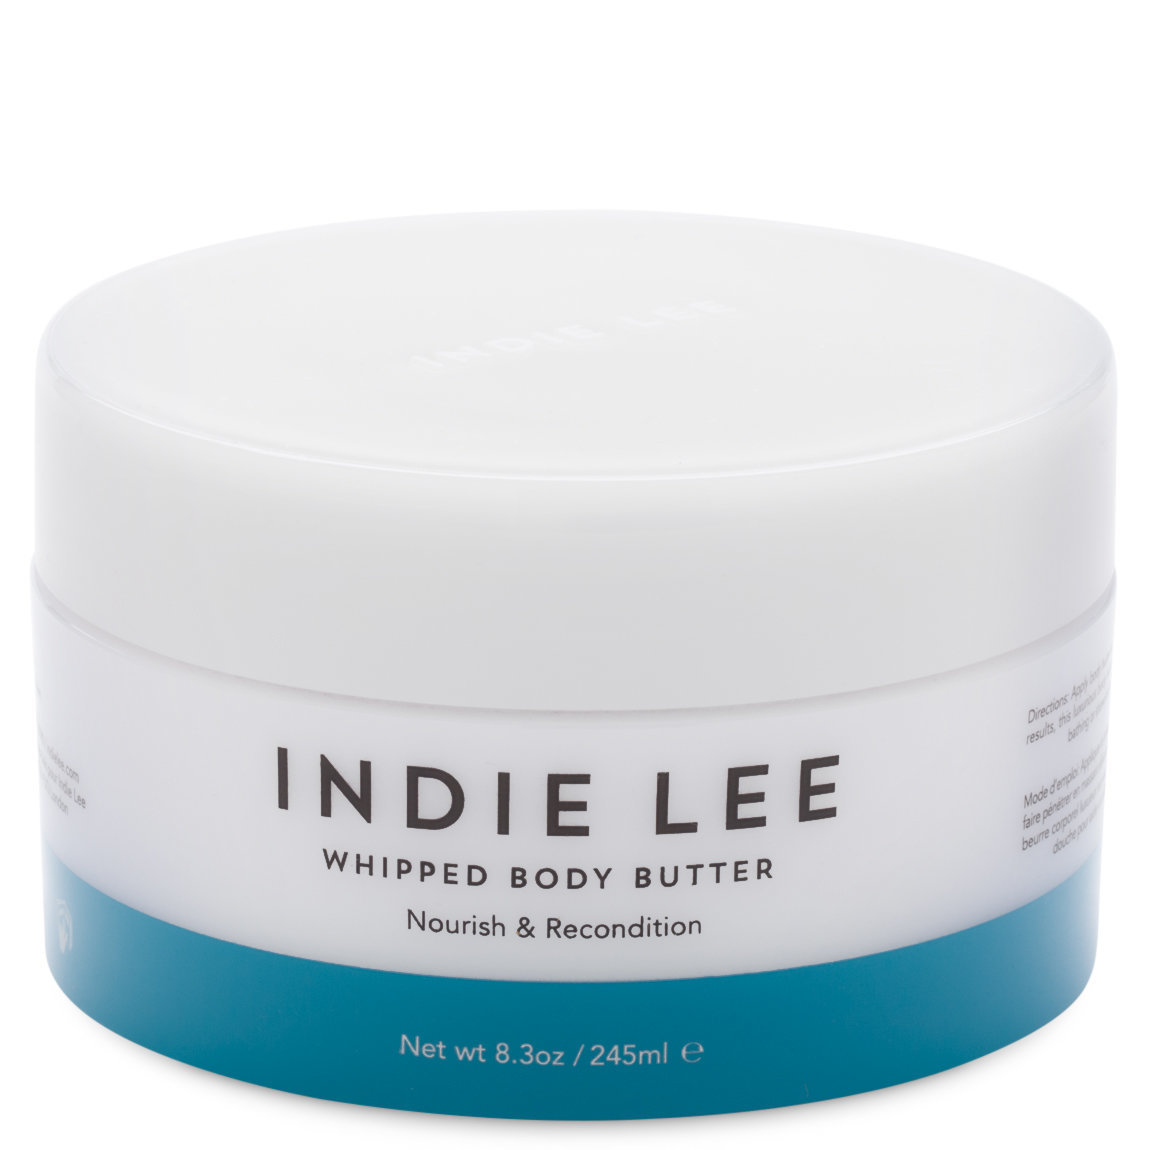 Indie Lee Whipped Body Butter alternative view 1 - product swatch.